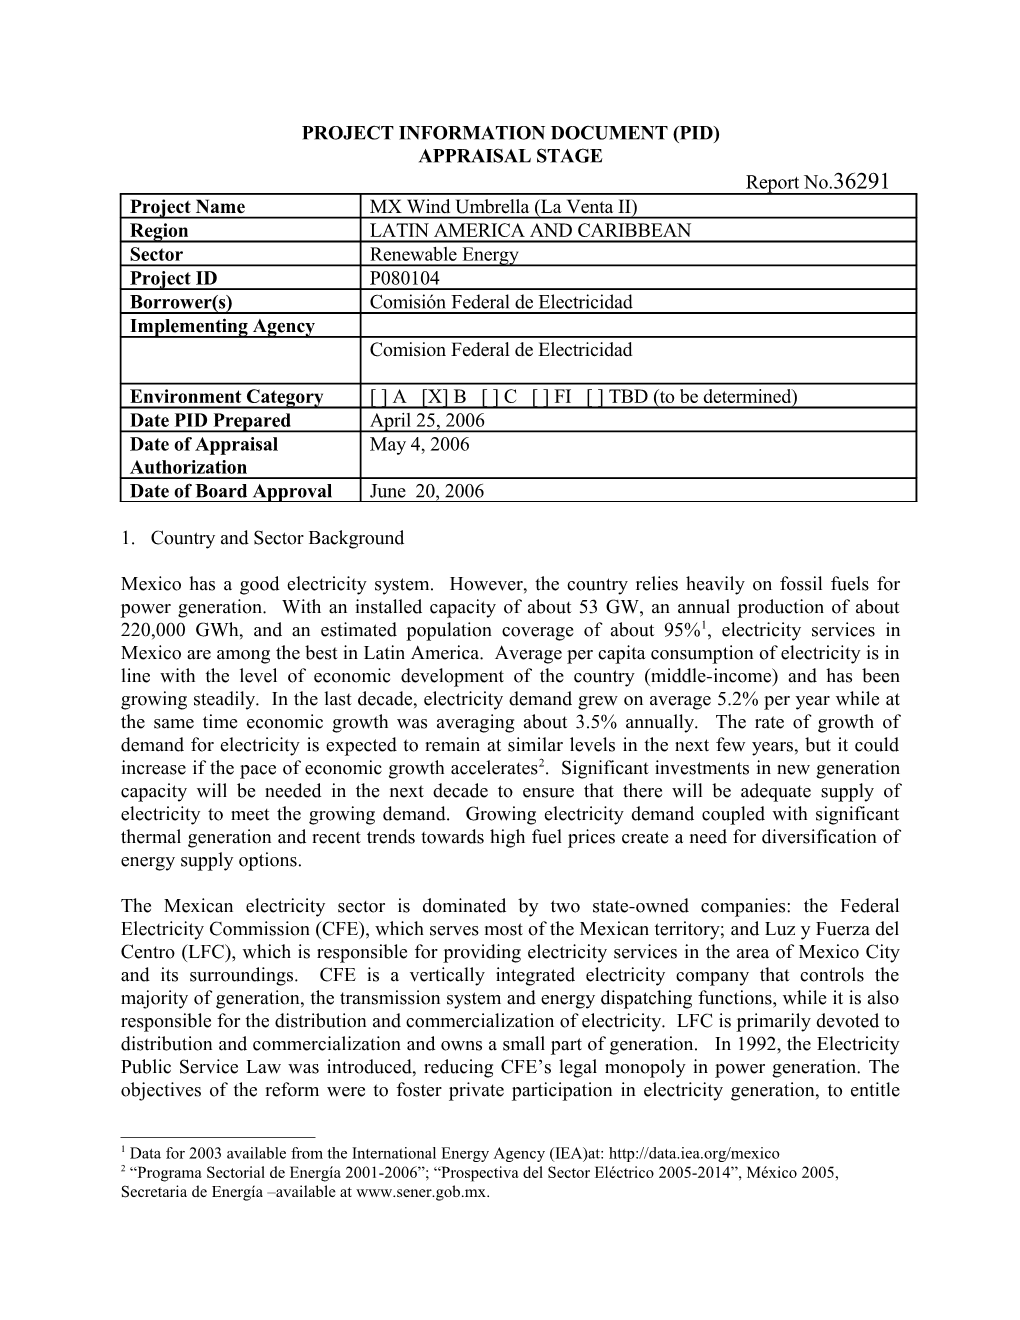 Project Information Document (Pid) s85